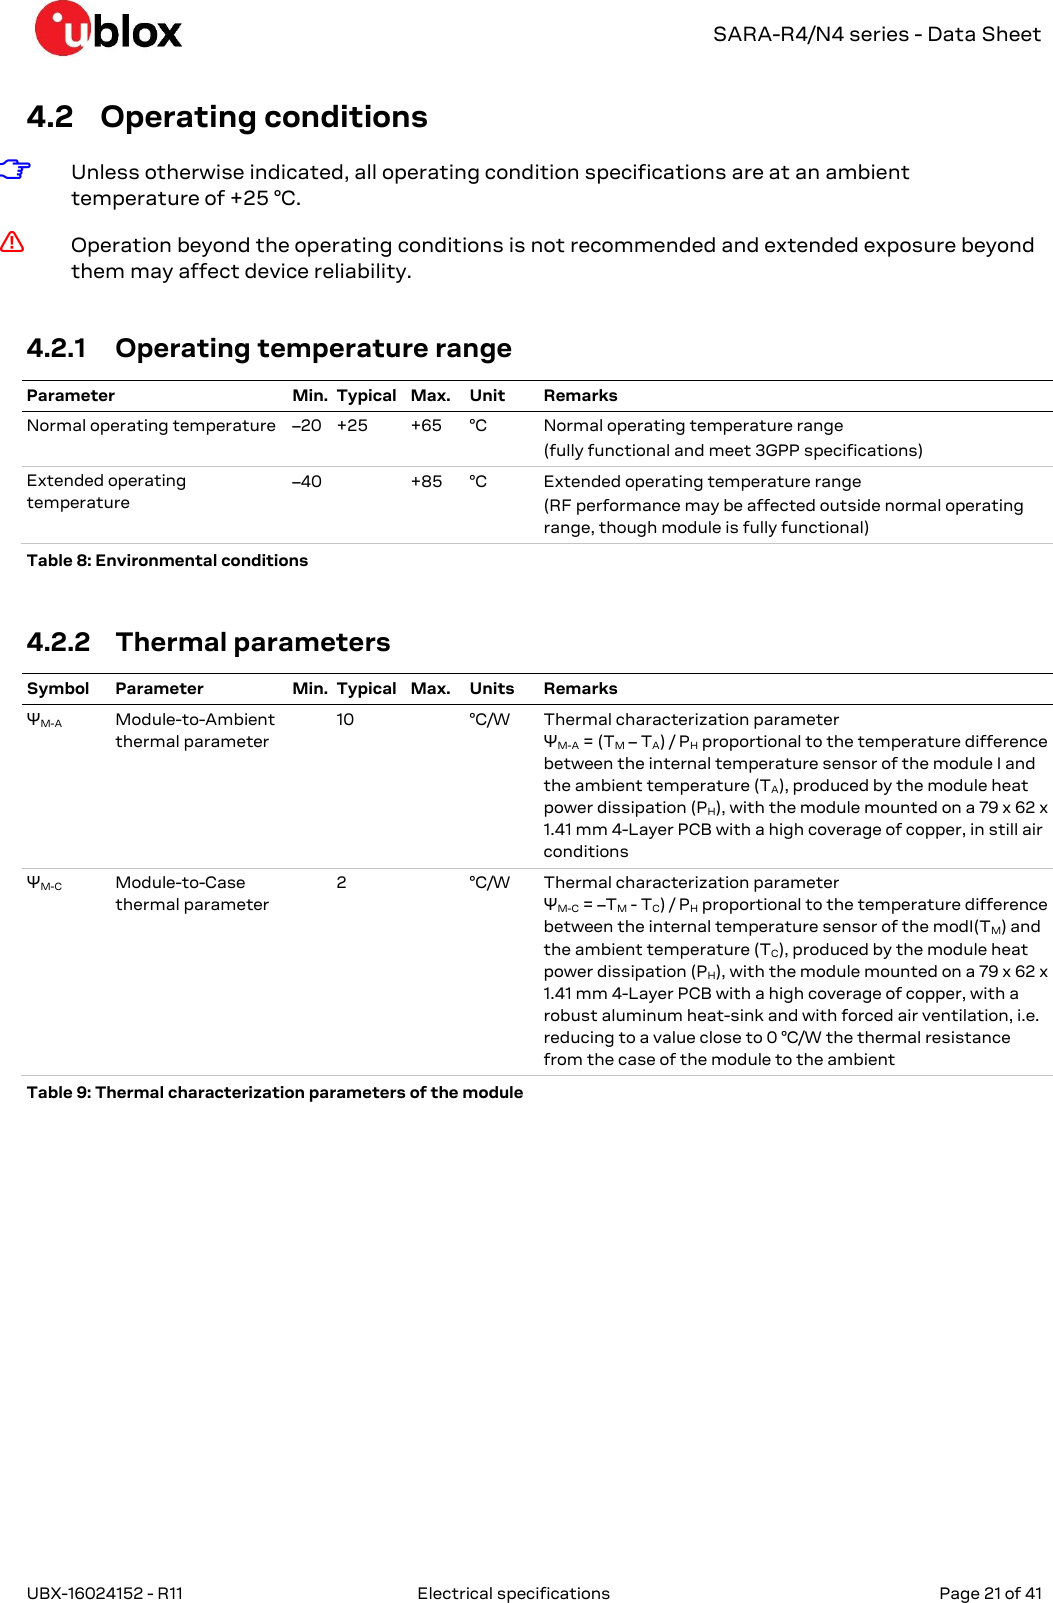   SARA-R4/N4 series - Data Sheet UBX-16024152 - R11  Electrical specifications   Page 21 of 41      4.2 Operating conditions ☞ Unless otherwise indicated, all operating condition specifications are at an ambient temperature of +25 °C. ⚠ Operation beyond the operating conditions is not recommended and extended exposure beyond them may affect device reliability.  4.2.1 Operating temperature range Parameter Min. Typical Max. Unit Remarks Normal operating temperature –20 +25 +65 °C Normal operating temperature range  (fully functional and meet 3GPP specifications) Extended operating temperature –40  +85 °C Extended operating temperature range  (RF performance may be affected outside normal operating range, though module is fully functional) Table 8: Environmental conditions  4.2.2 Thermal parameters Symbol Parameter Min. Typical Max. Units Remarks ΨM-A  Module-to-Ambient  thermal parameter  10  °C/W Thermal characterization parameter  ΨM-A = (TM – TA) / PH proportional to the temperature difference between the internal temperature sensor of the module I and the ambient temperature (TA), produced by the module heat power dissipation (PH), with the module mounted on a 79 x 62 x 1.41 mm 4-Layer PCB with a high coverage of copper, in still air conditions ΨM-C  Module-to-Case  thermal parameter  2  °C/W Thermal characterization parameter  ΨM-C = –TM - TC) / PH proportional to the temperature difference between the internal temperature sensor of the modI(TM) and the ambient temperature (TC), produced by the module heat power dissipation (PH), with the module mounted on a 79 x 62 x 1.41 mm 4-Layer PCB with a high coverage of copper, with a robust aluminum heat-sink and with forced air ventilation, i.e. reducing to a value close to 0 °C/W the thermal resistance from the case of the module to the ambient Table 9: Thermal characterization parameters of the module 